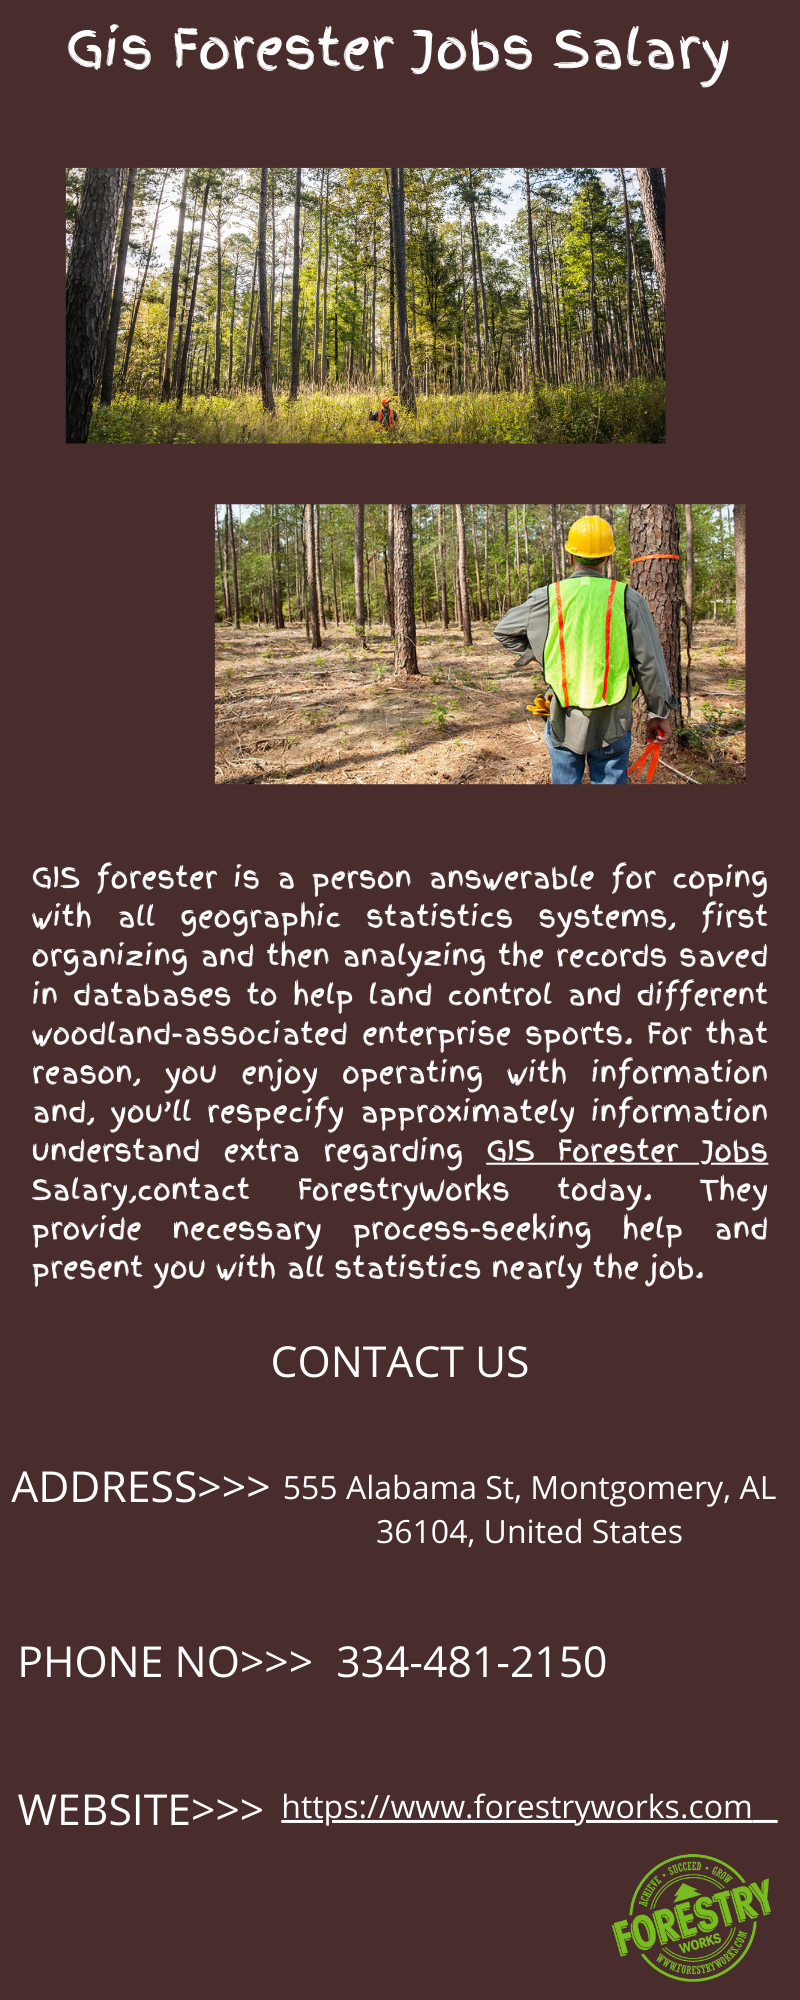 Systematic Gis Forester Jobs Salary